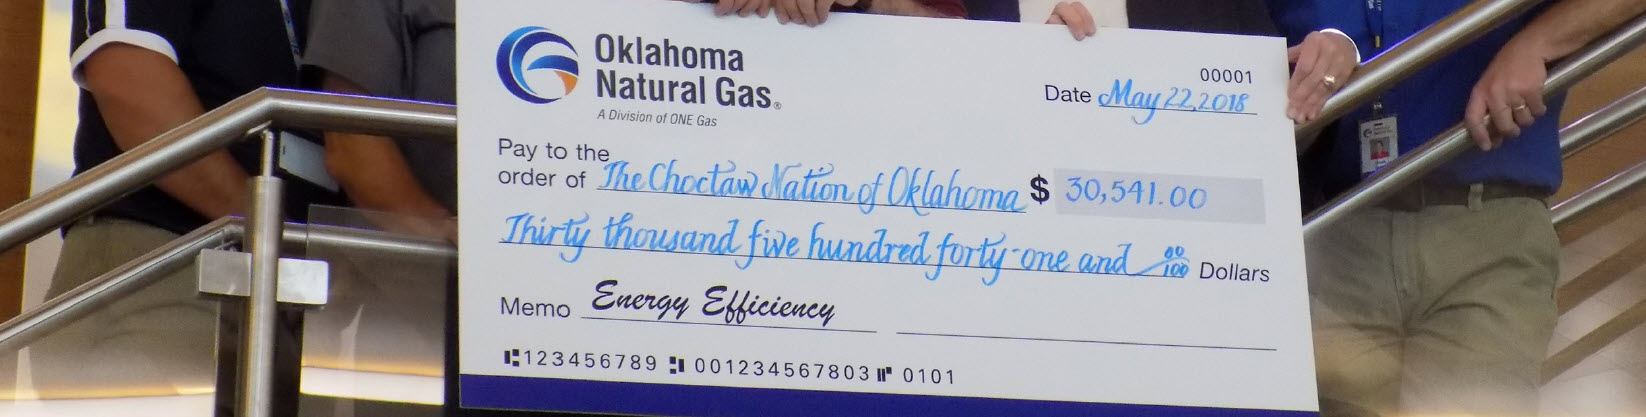 oklahoma-natural-gas-case-study-the-choctaw-nation-of-oklahoma